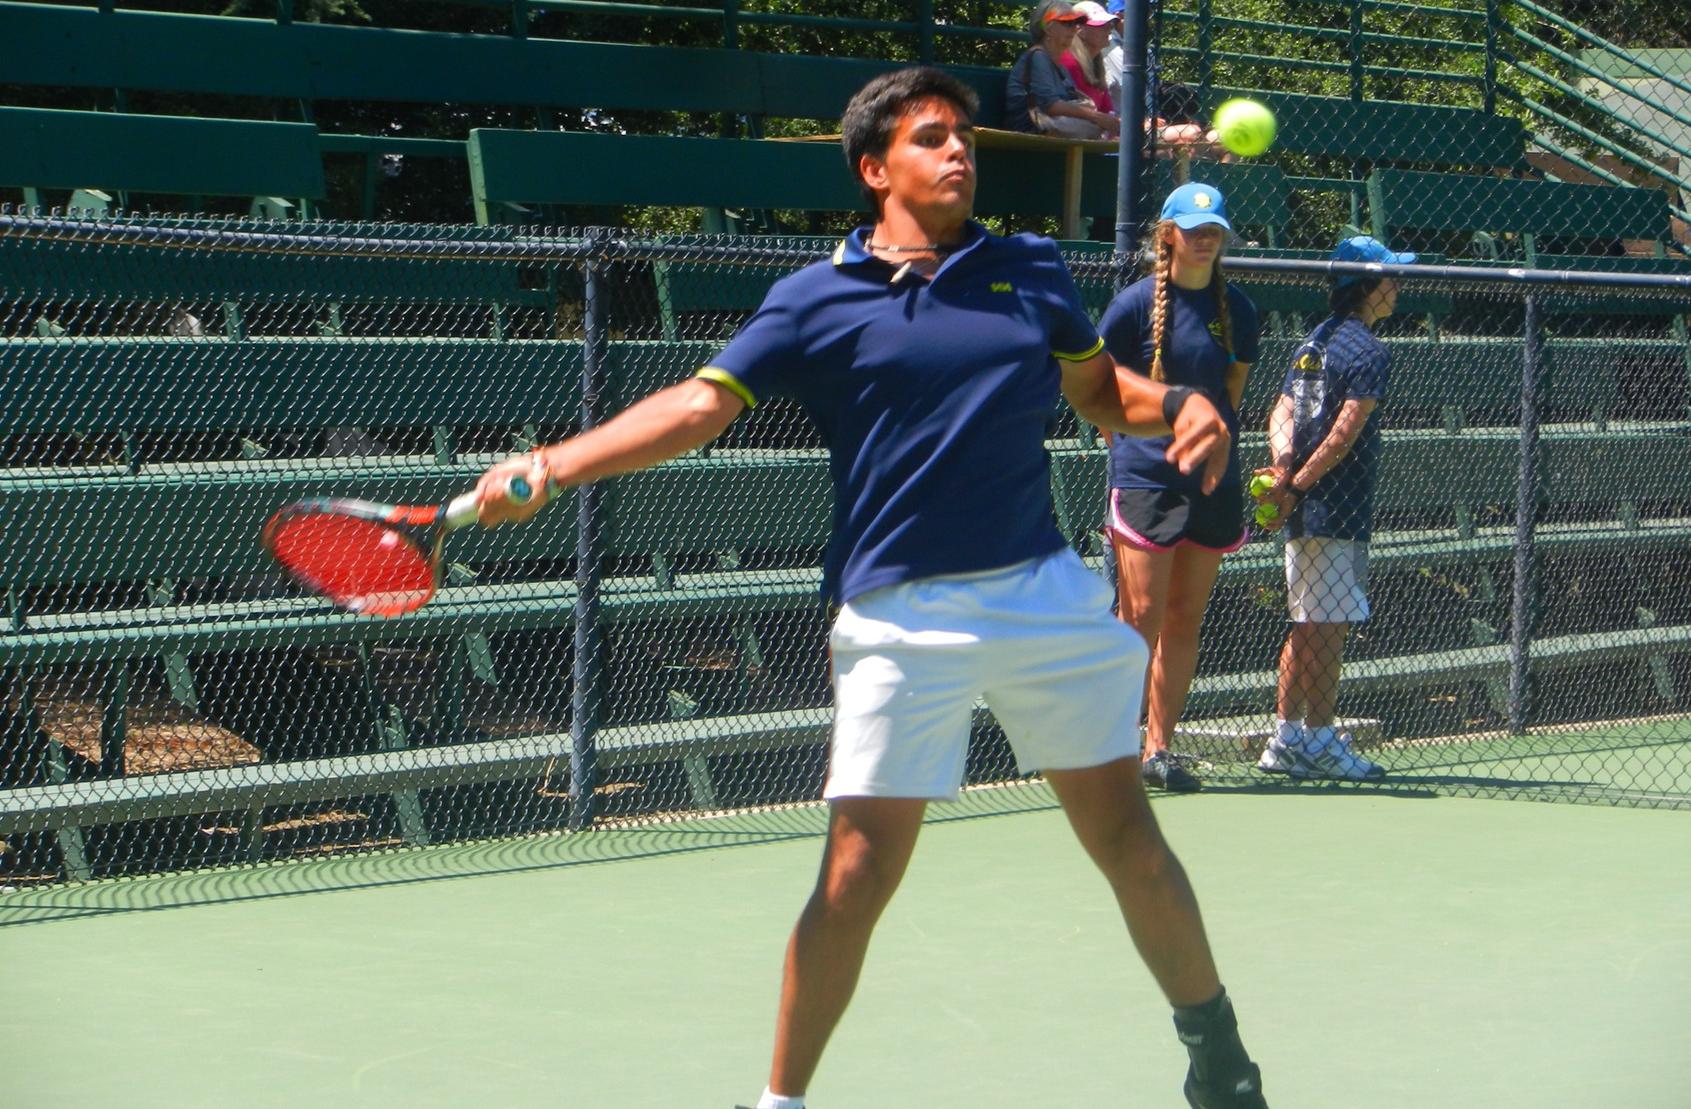 Javier Callejo going after his second state tennis singles title